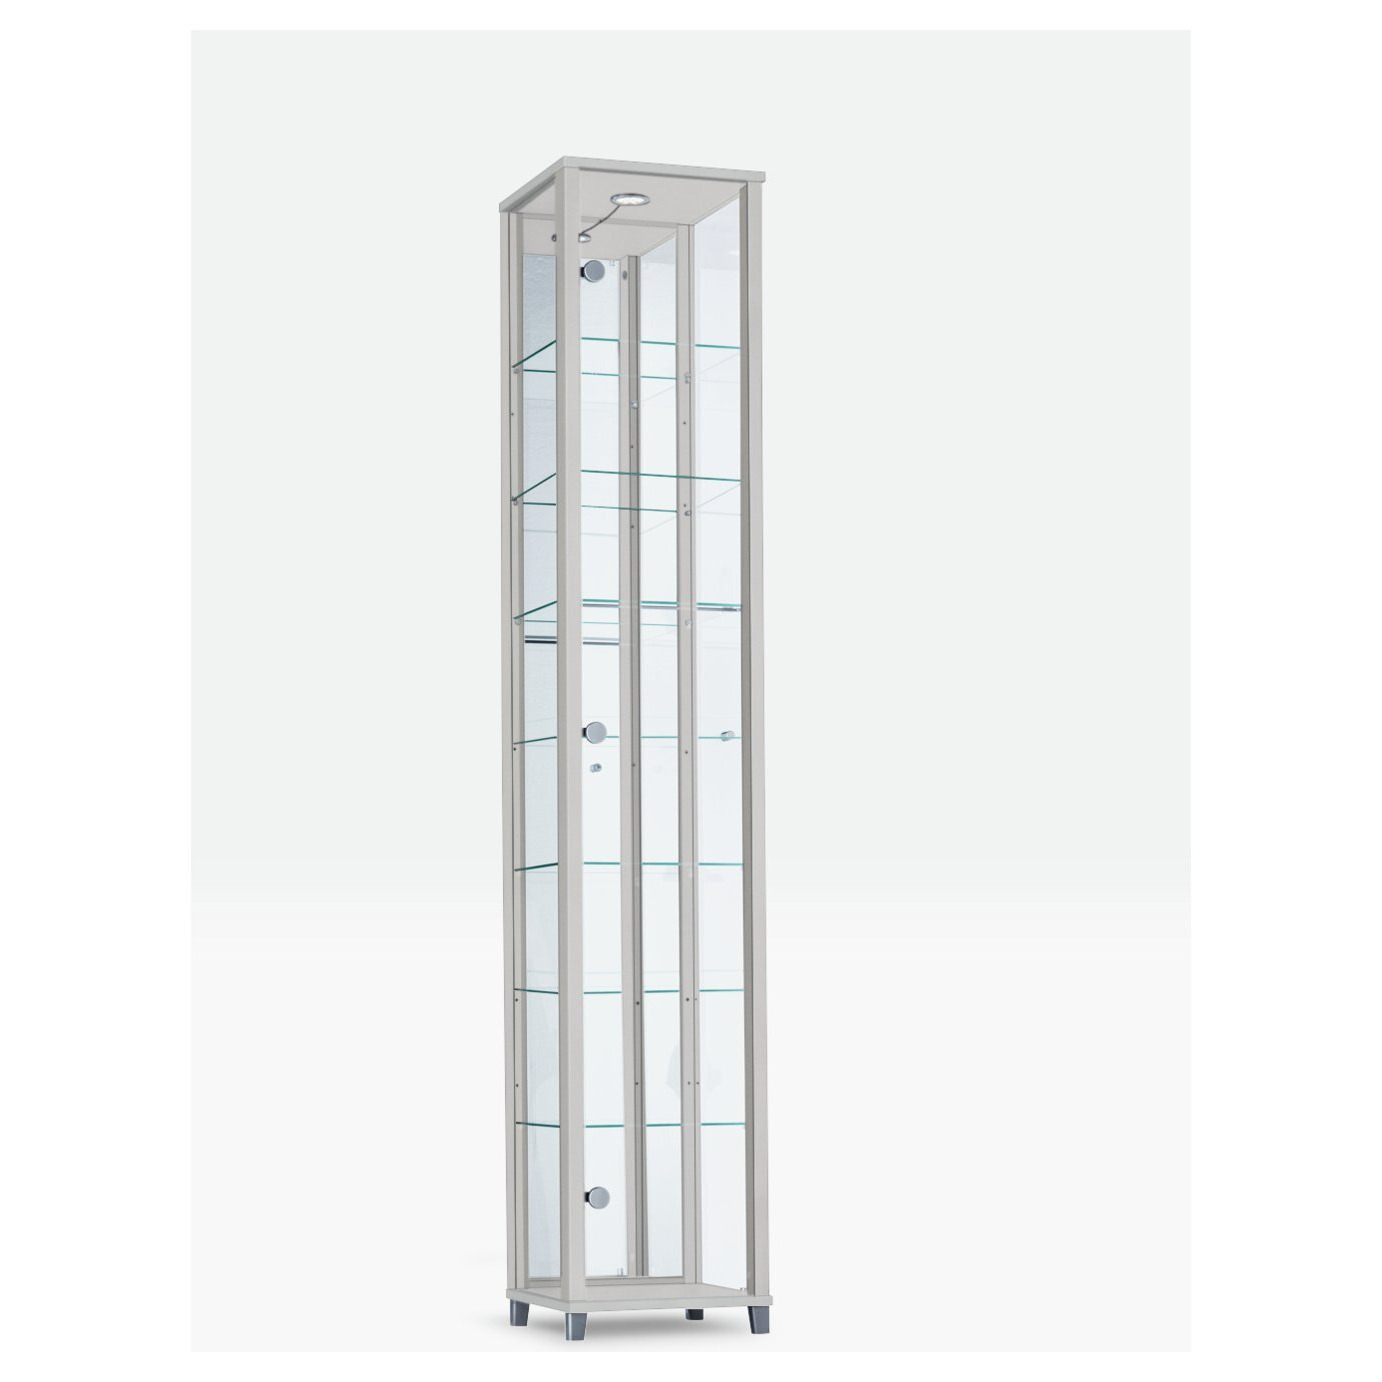 Argos Home 7 Shelf Glass Tall Display Cabinet - Silver - image 1